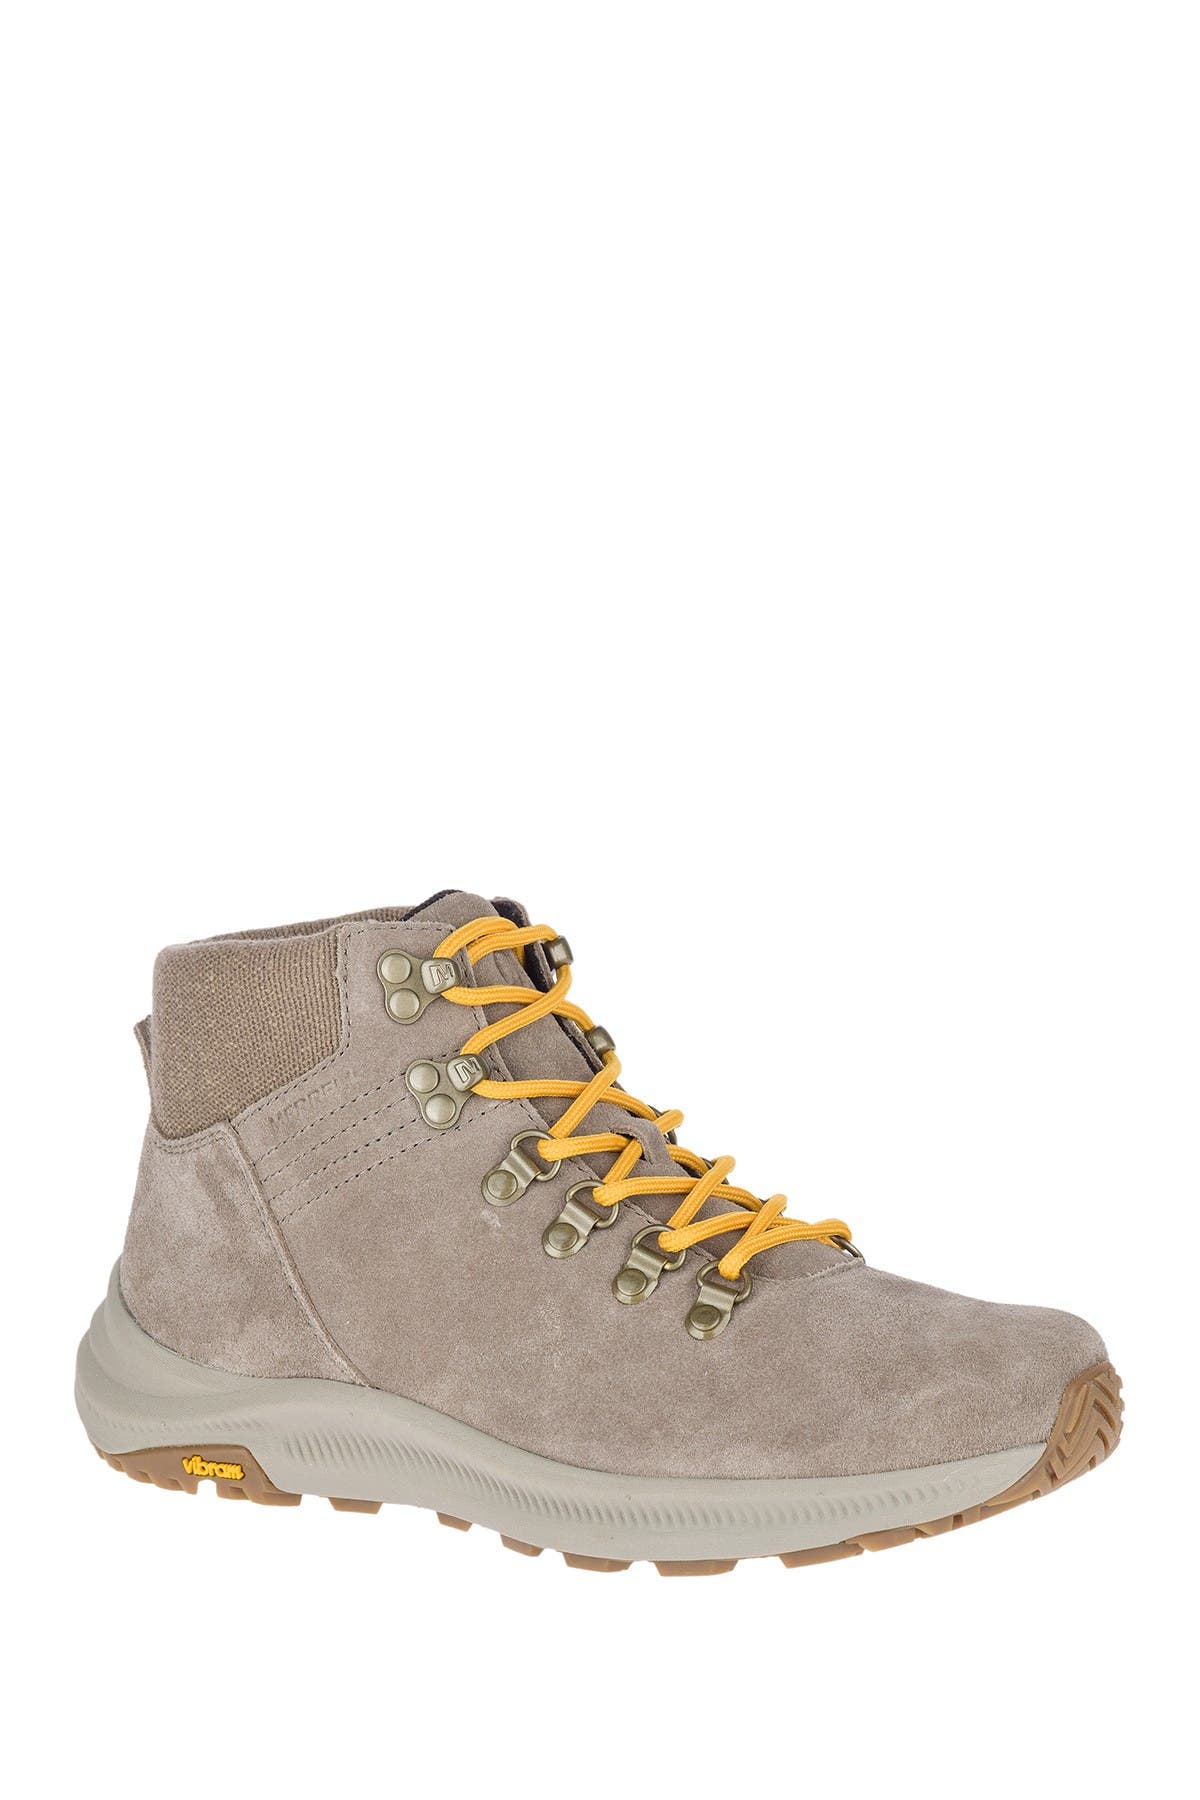 Merrell | Ontario Suede Lace-Up Boot 